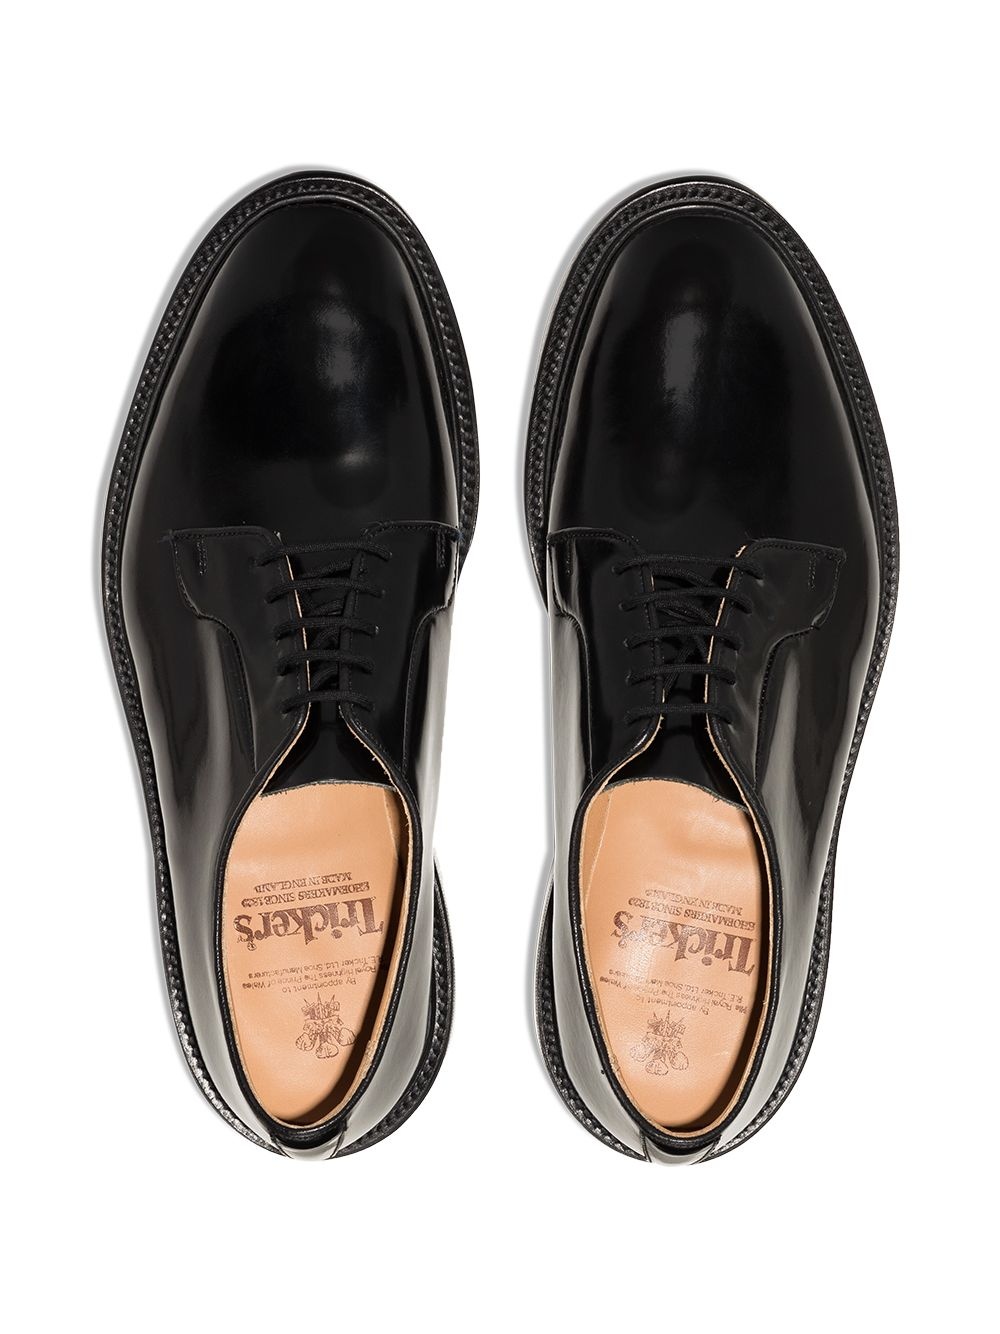 Robert leather Derby shoes - 4